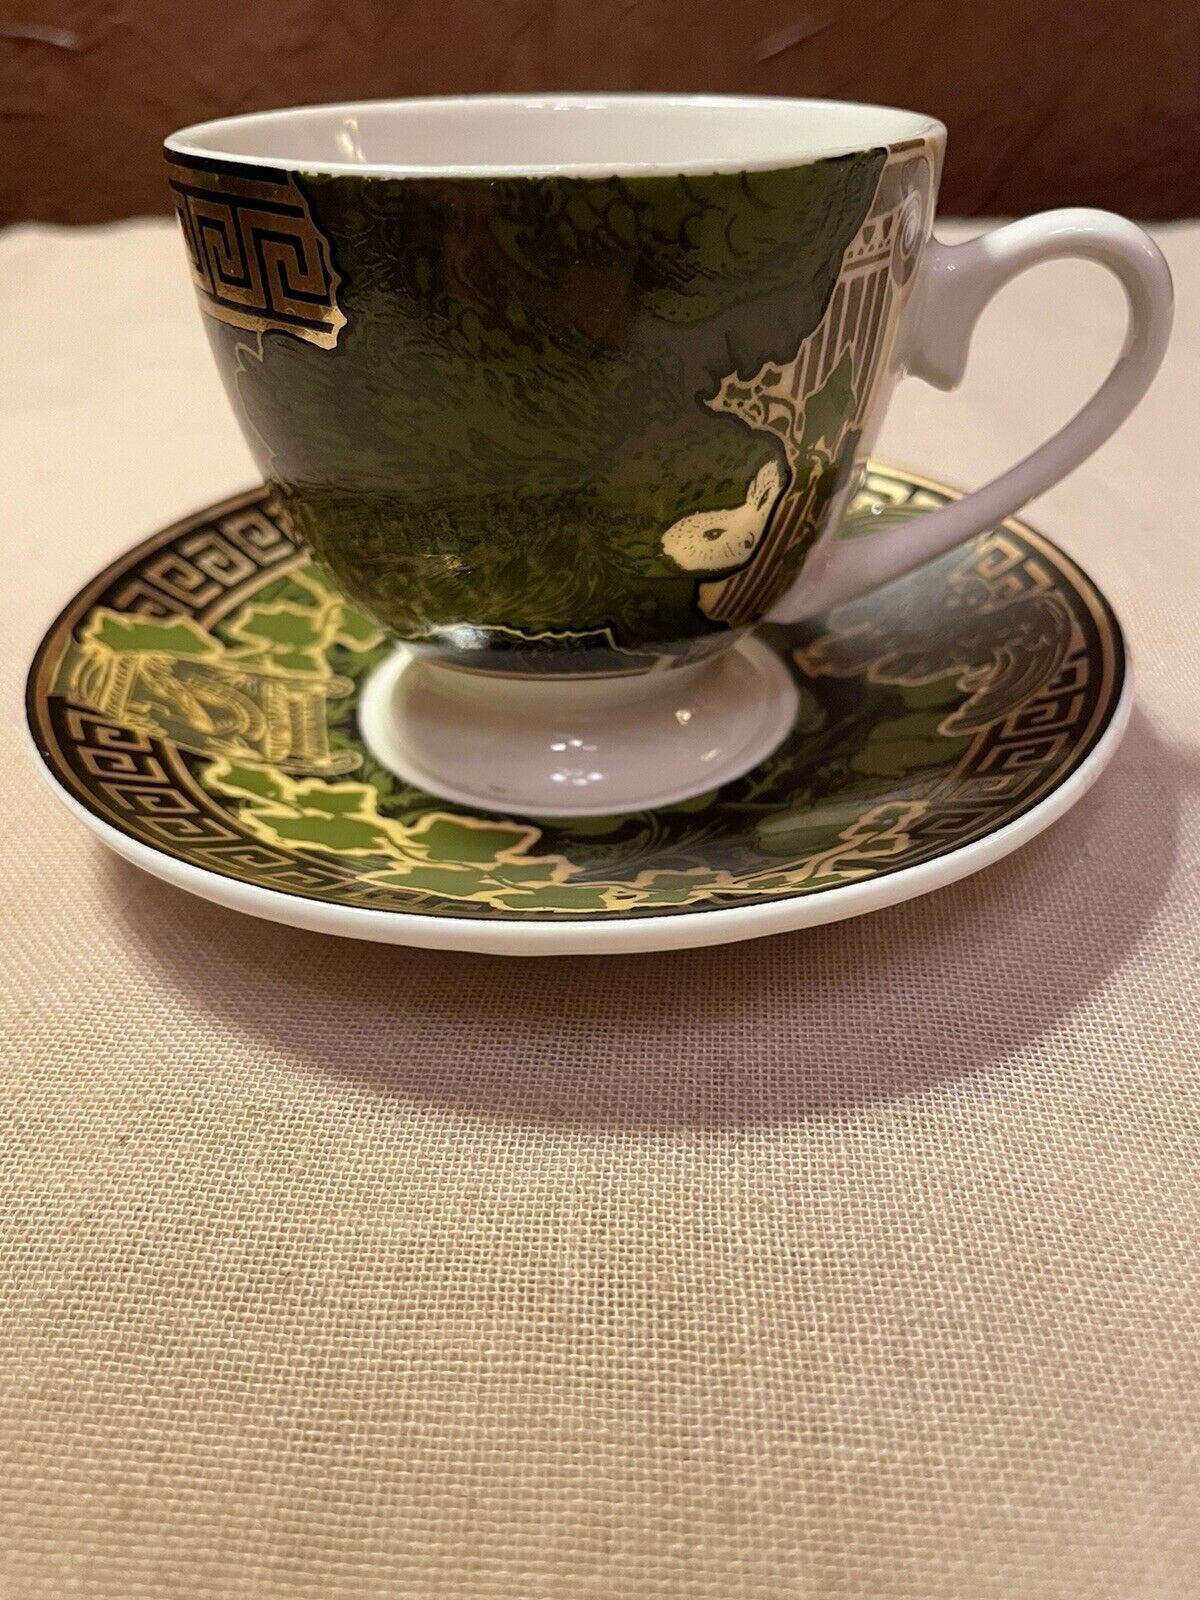 Demitasse Tea Cup and Saucer. By Illumicrate Goddess Of Wisdom - Athena